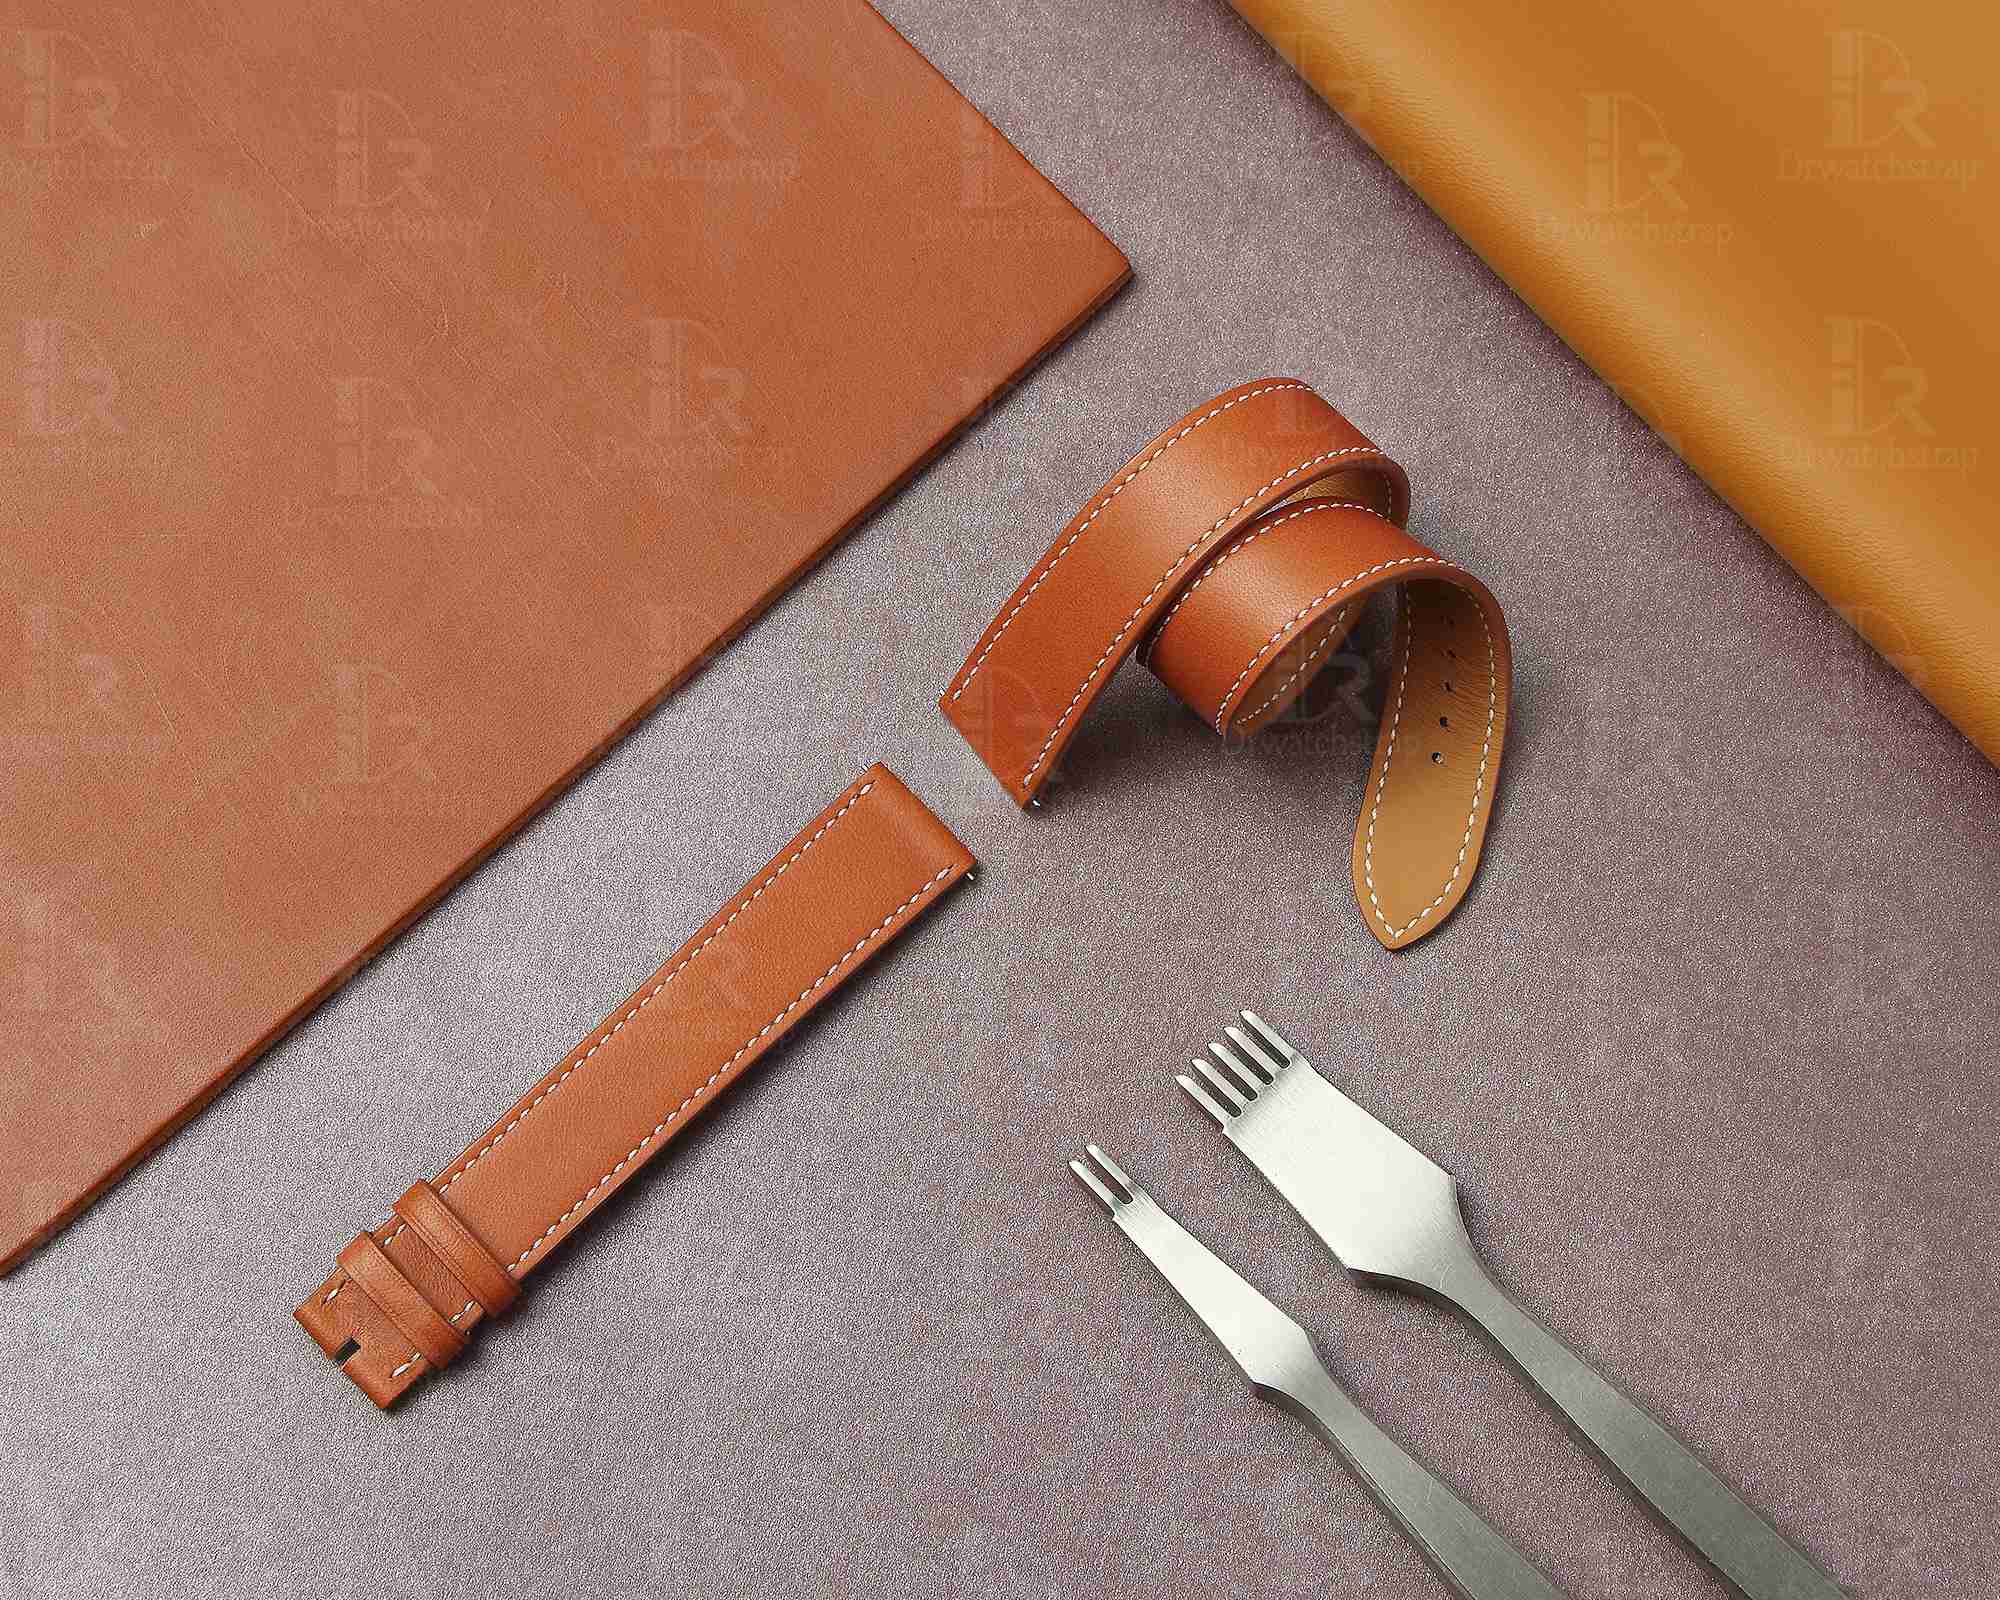 Custom Premium high-end quality calfskin replacement brown leather Hermes watch band and Hermes strap for Hermes Cape cod, Heure H, Arceau watches for sale - double wrap and double tour sport watch band online